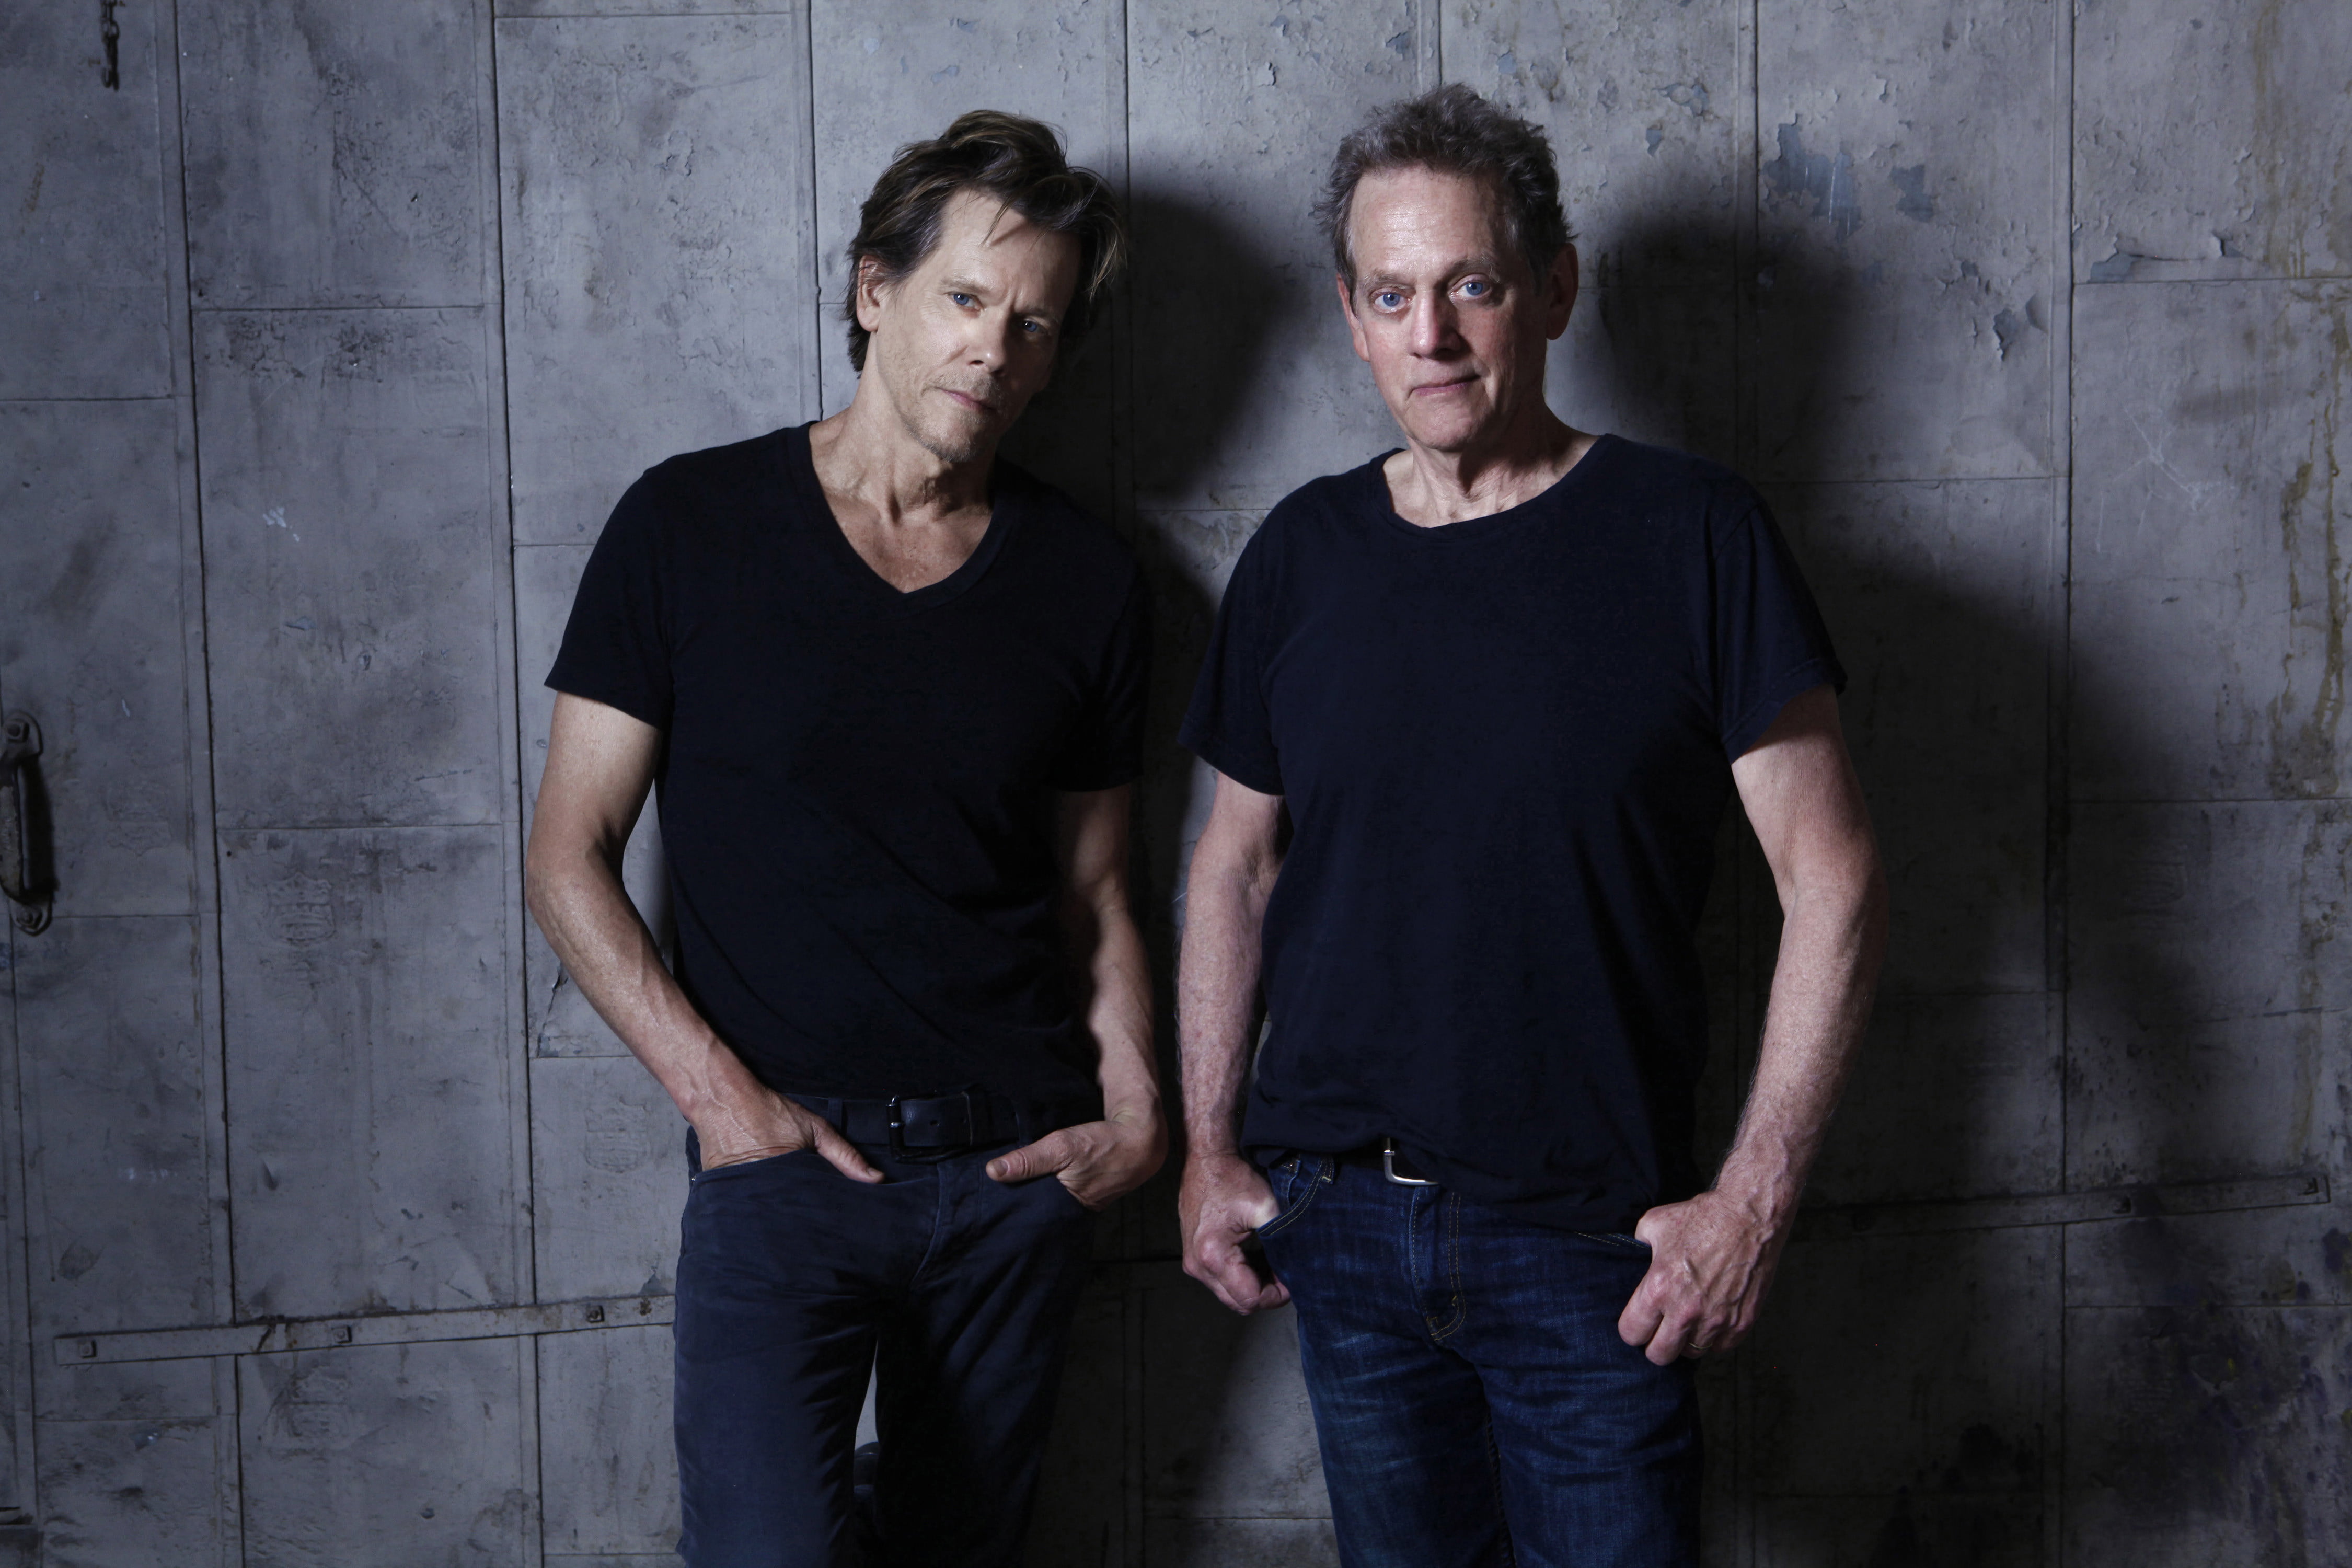 Shakin' Things Up: The Bacon Brothers - July 16, 2019